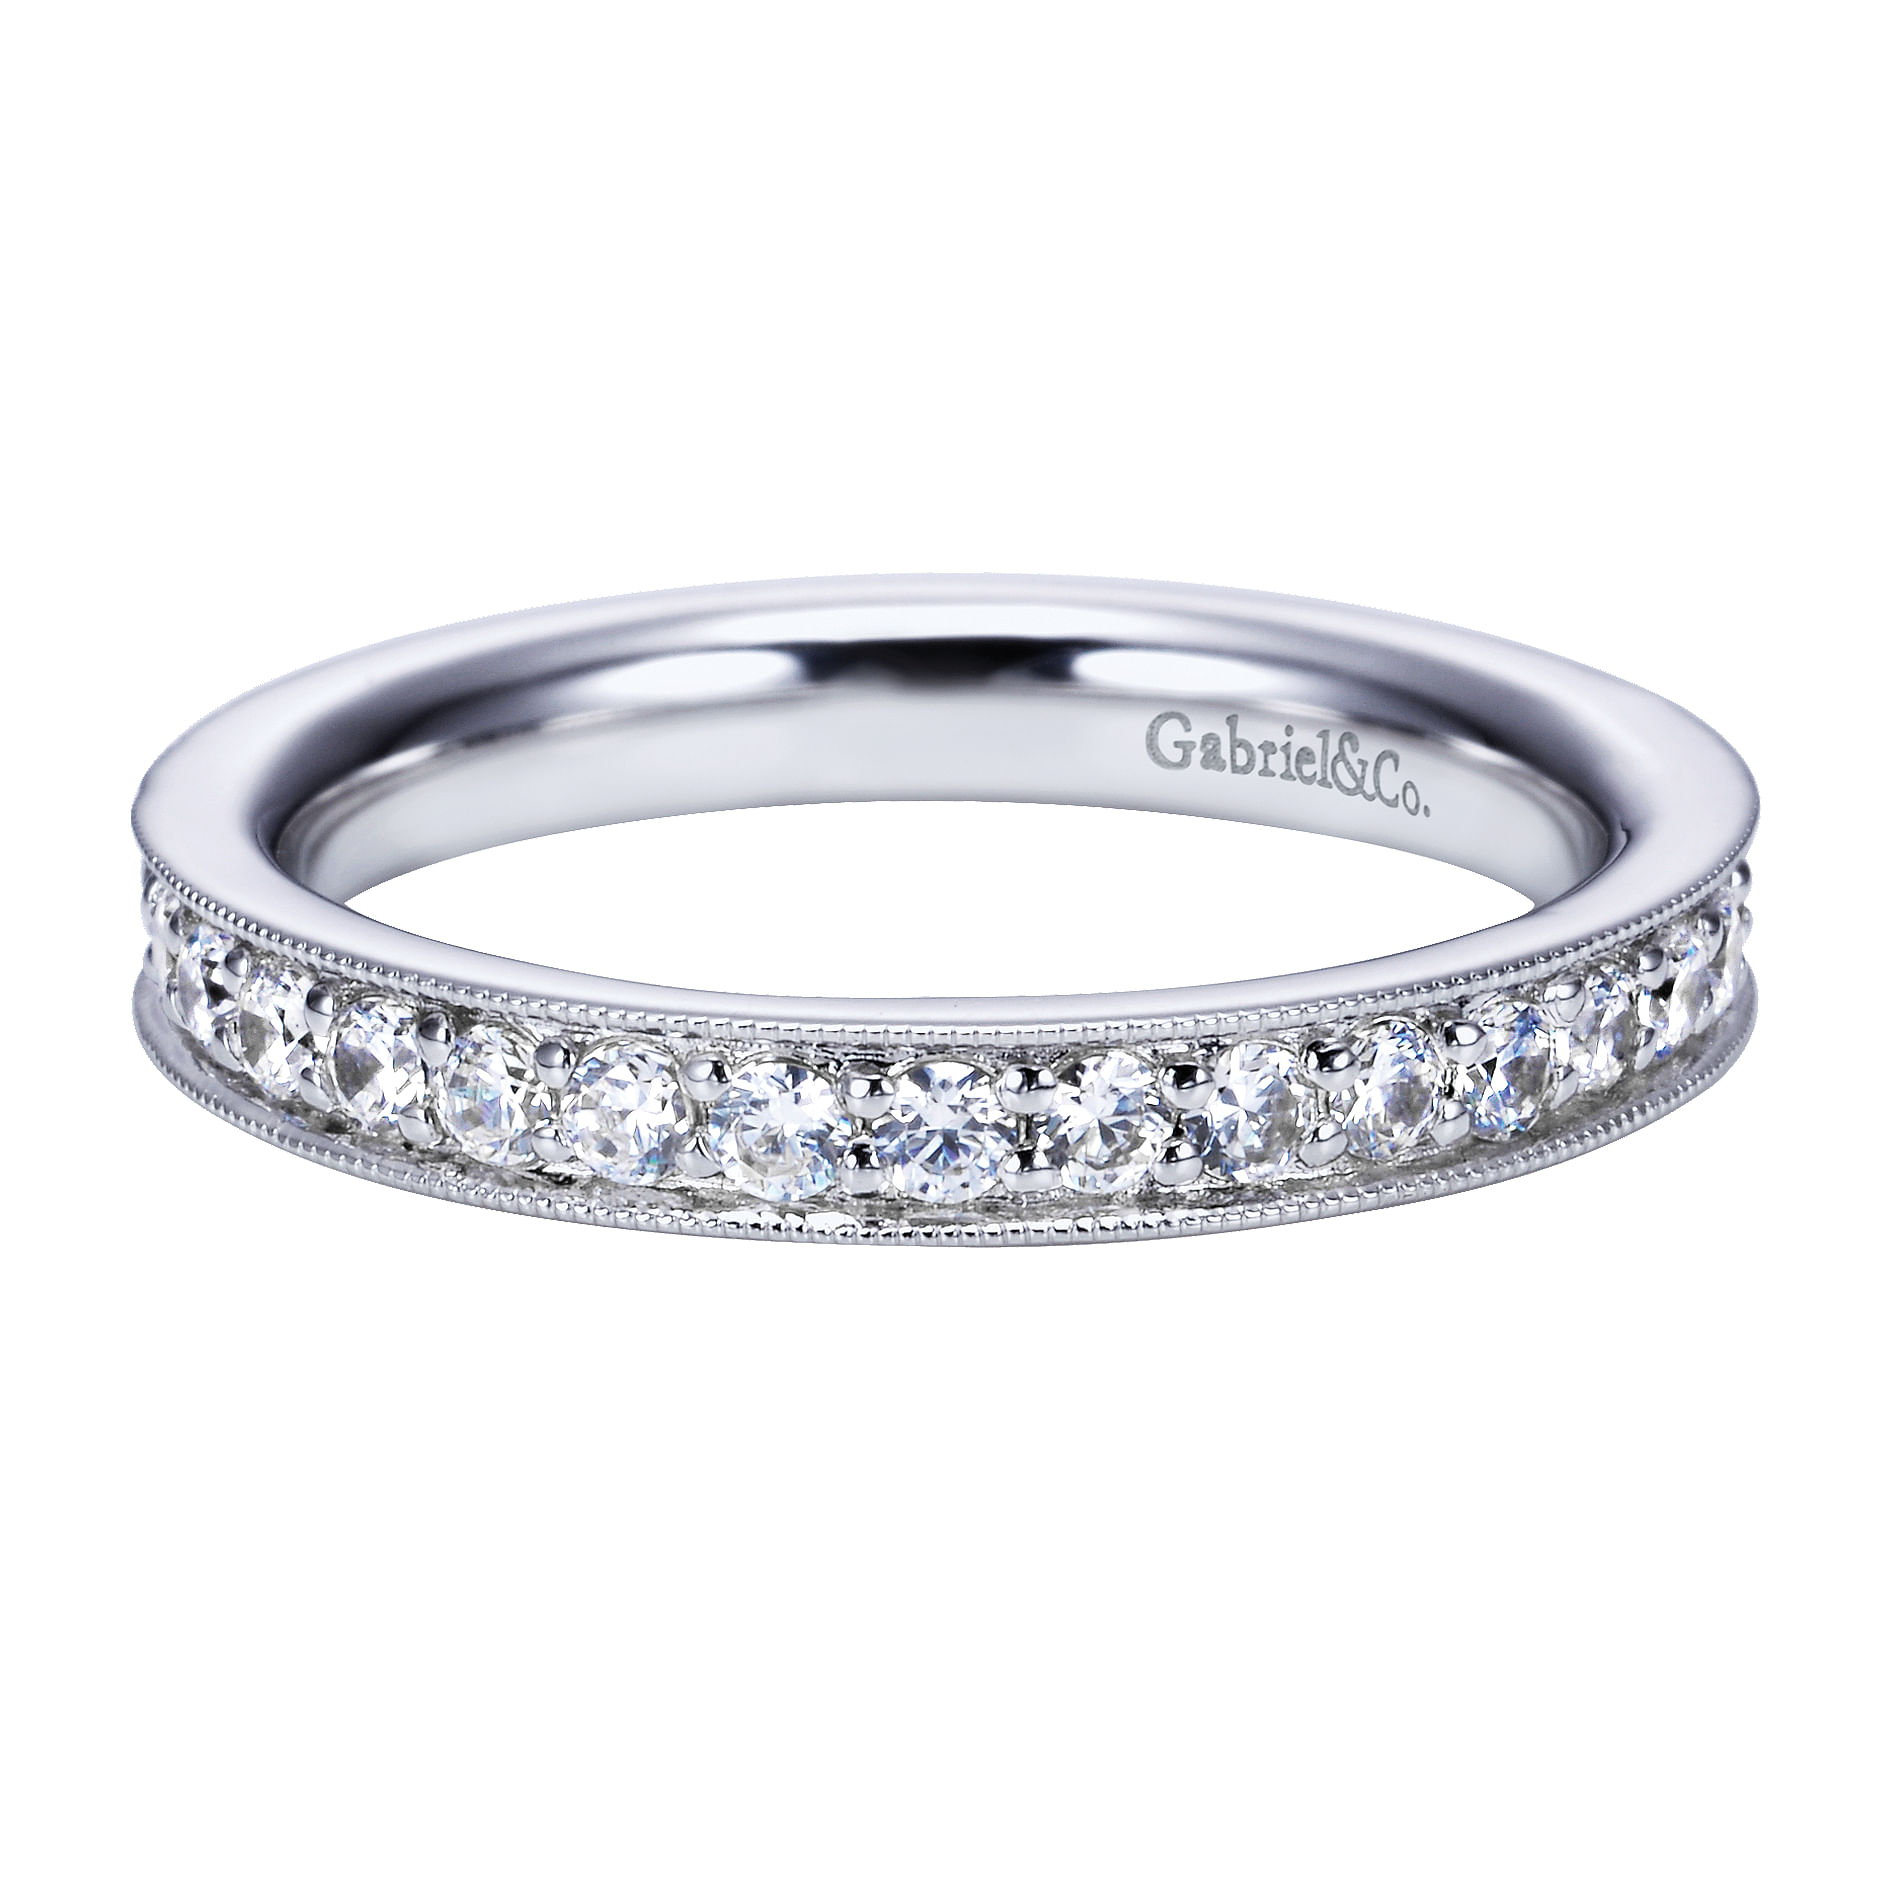 Calabria - 14K White Gold Channel Prong Diamond Eternity Band with Millgrain